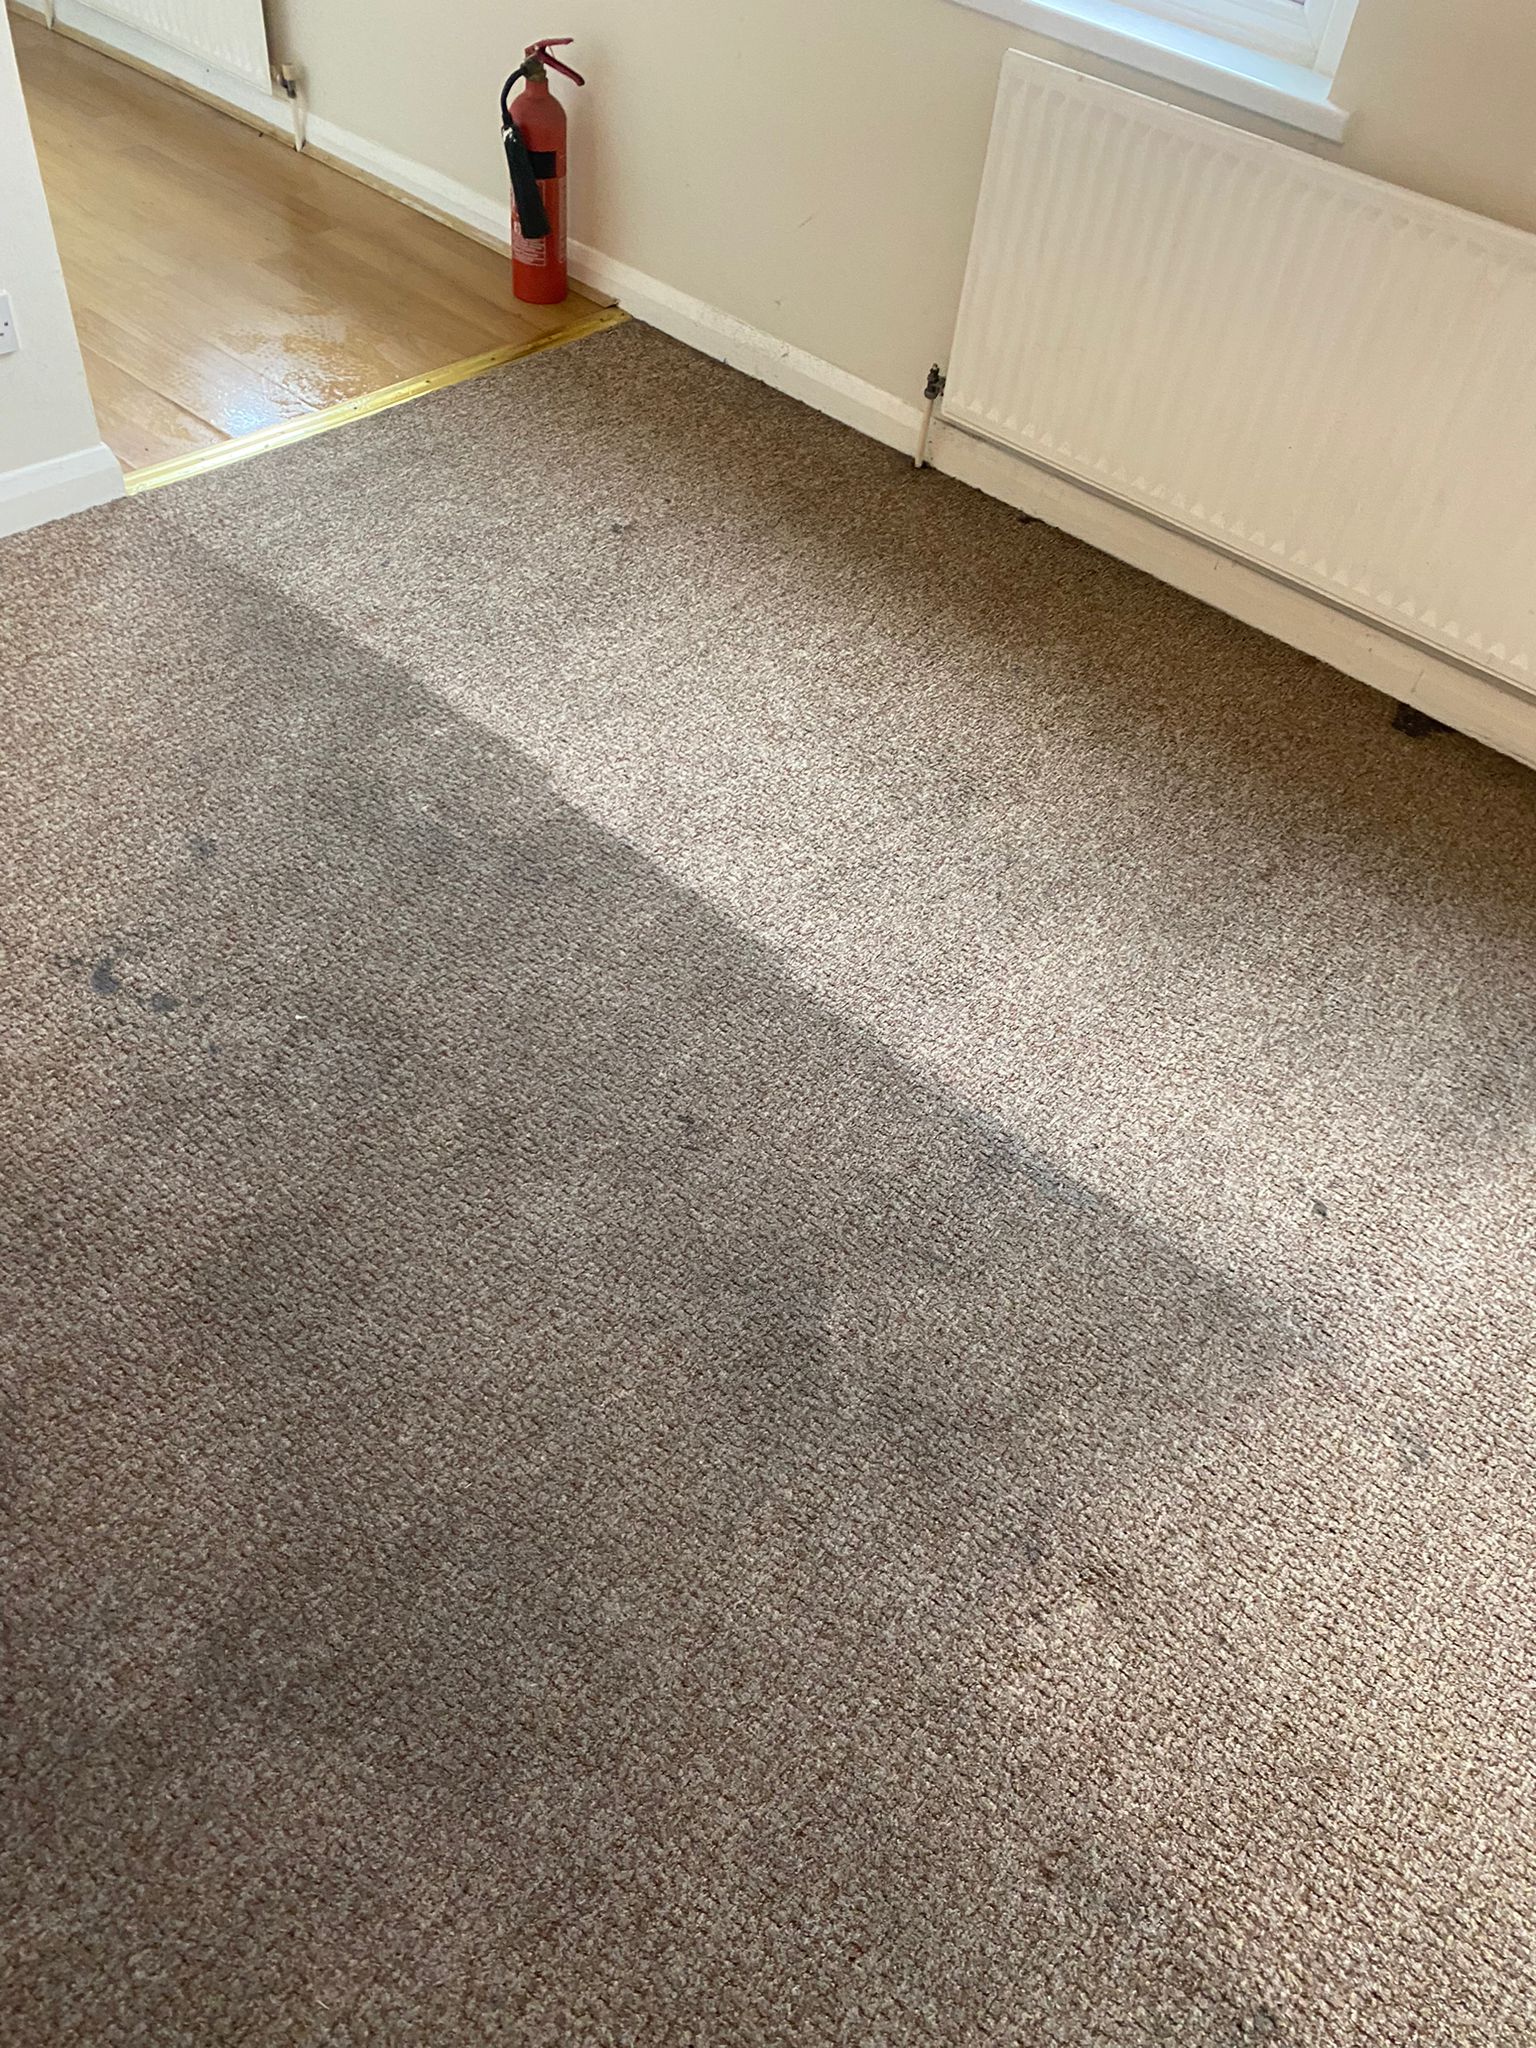 Process of cleaning a carpet